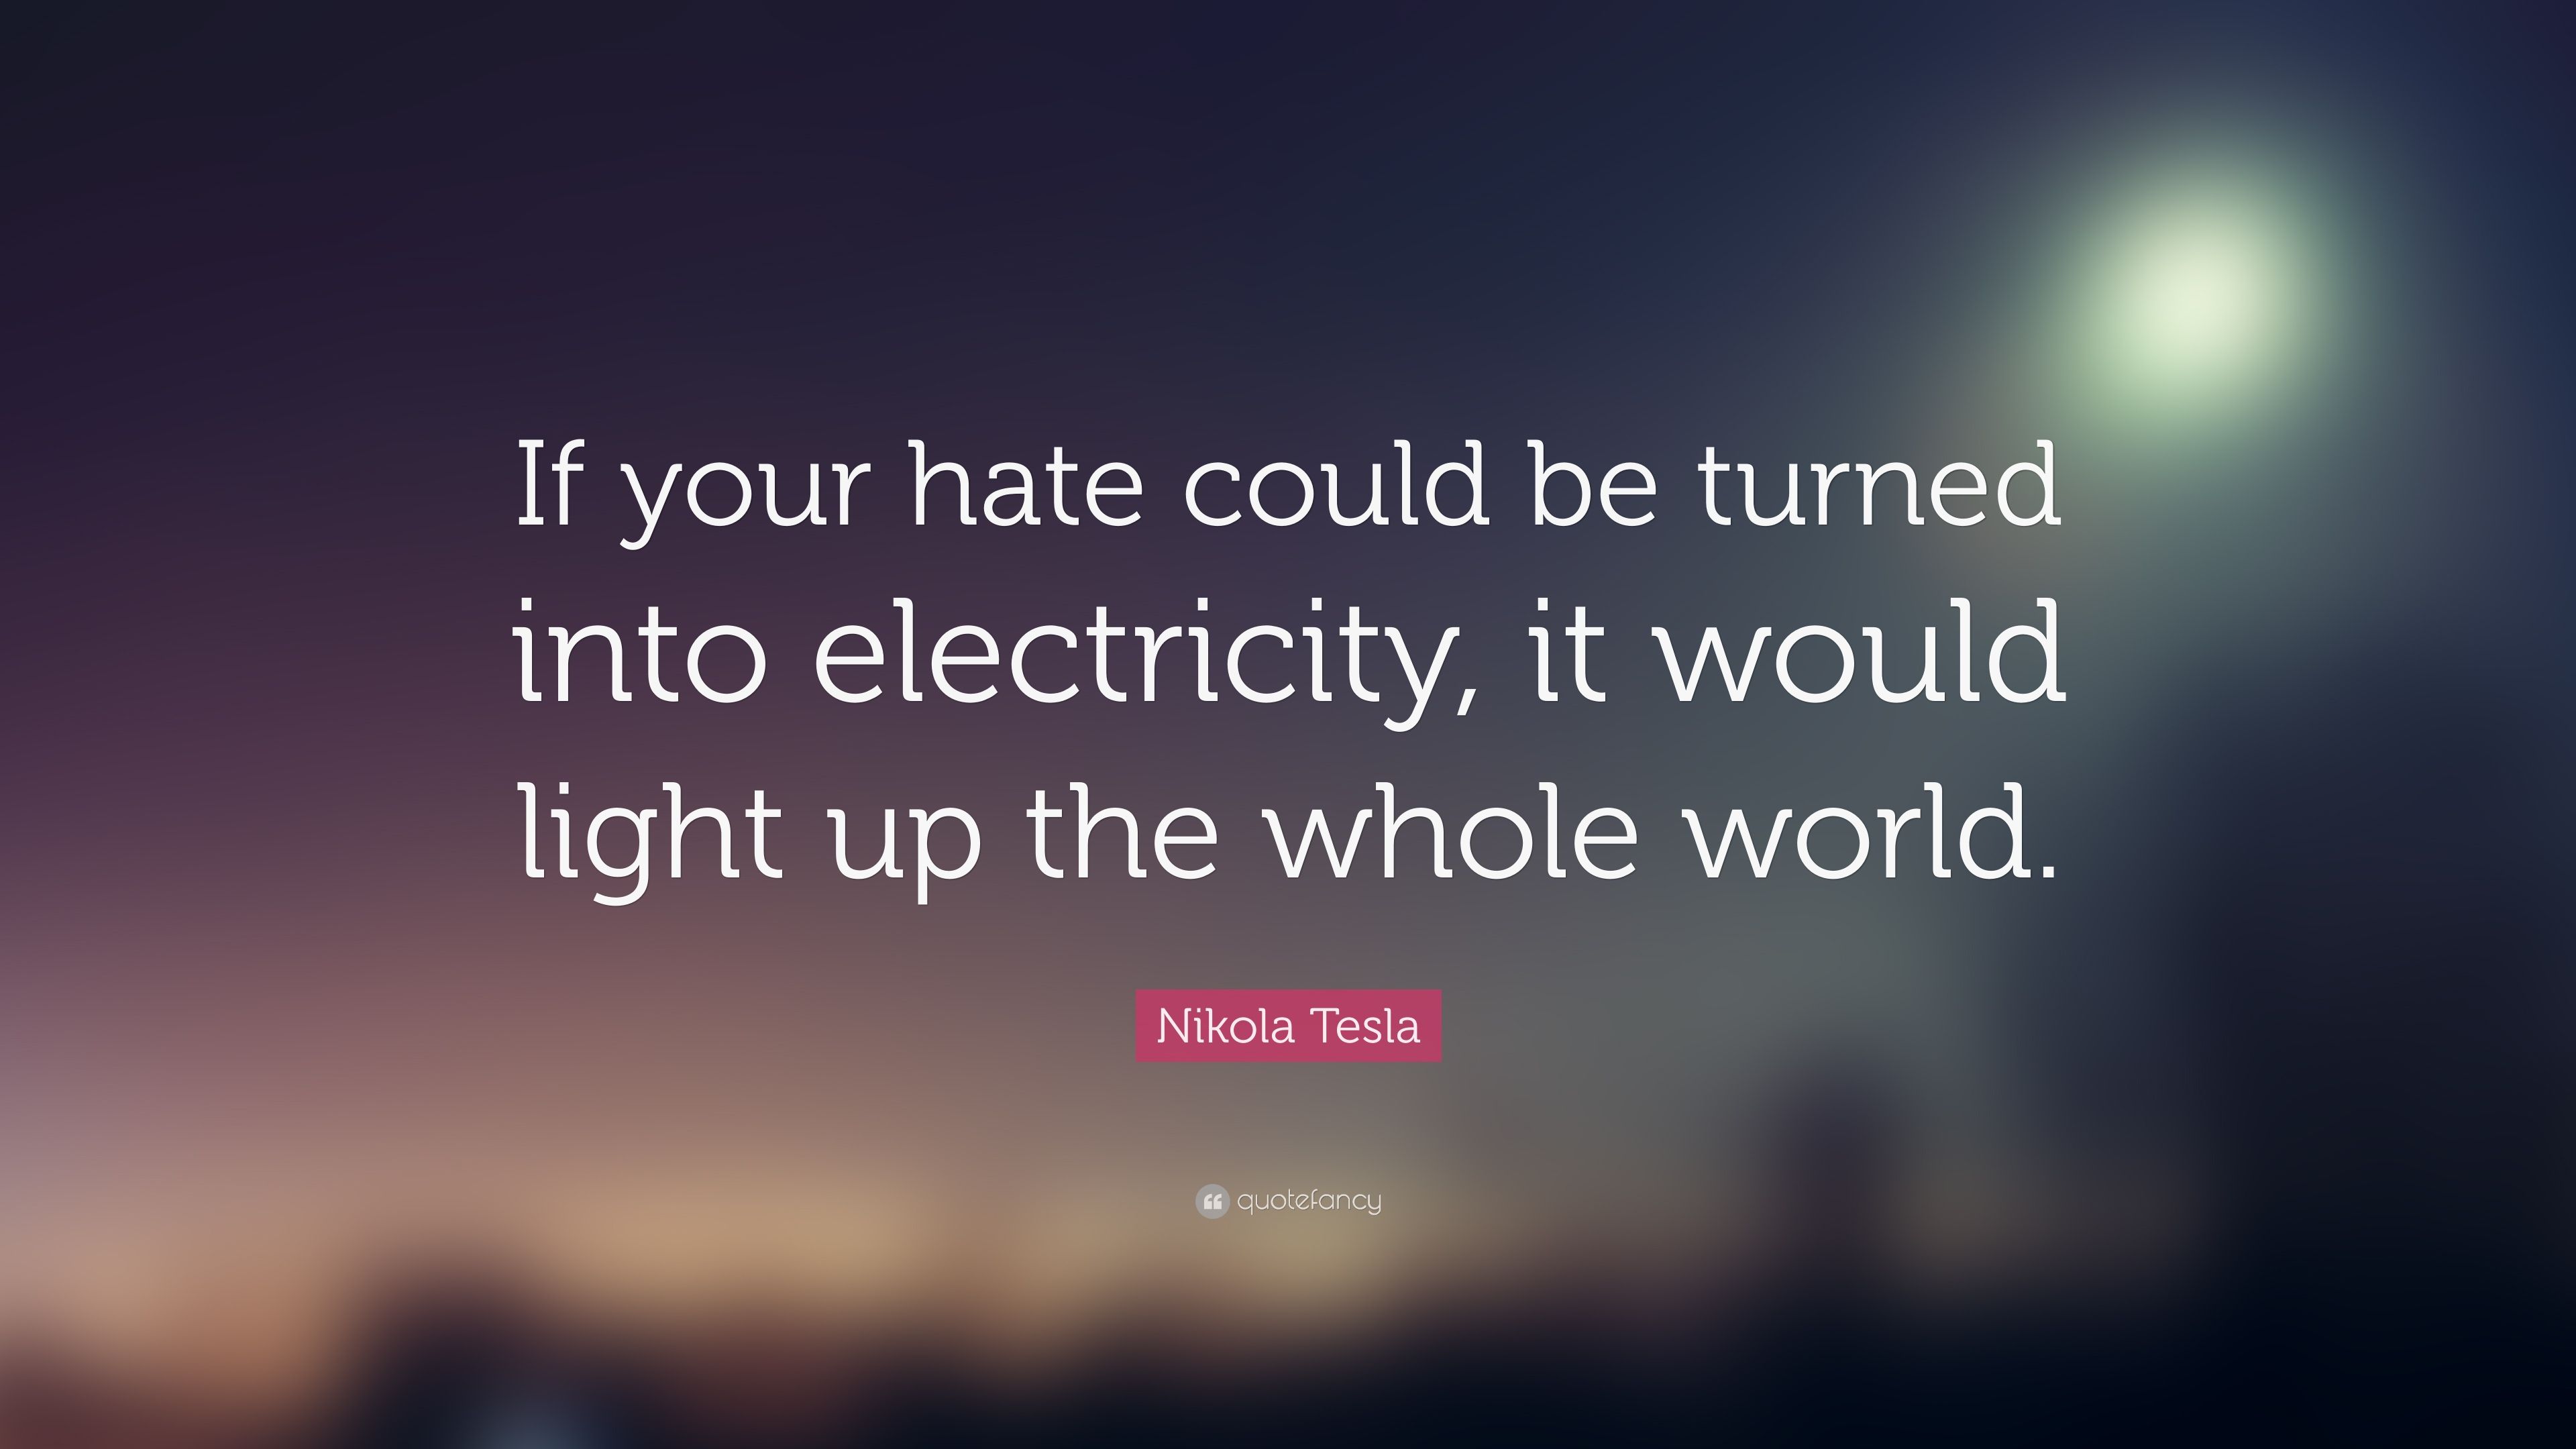 Nikola Tesla Quote: “If your hate could be turned into electricity ...